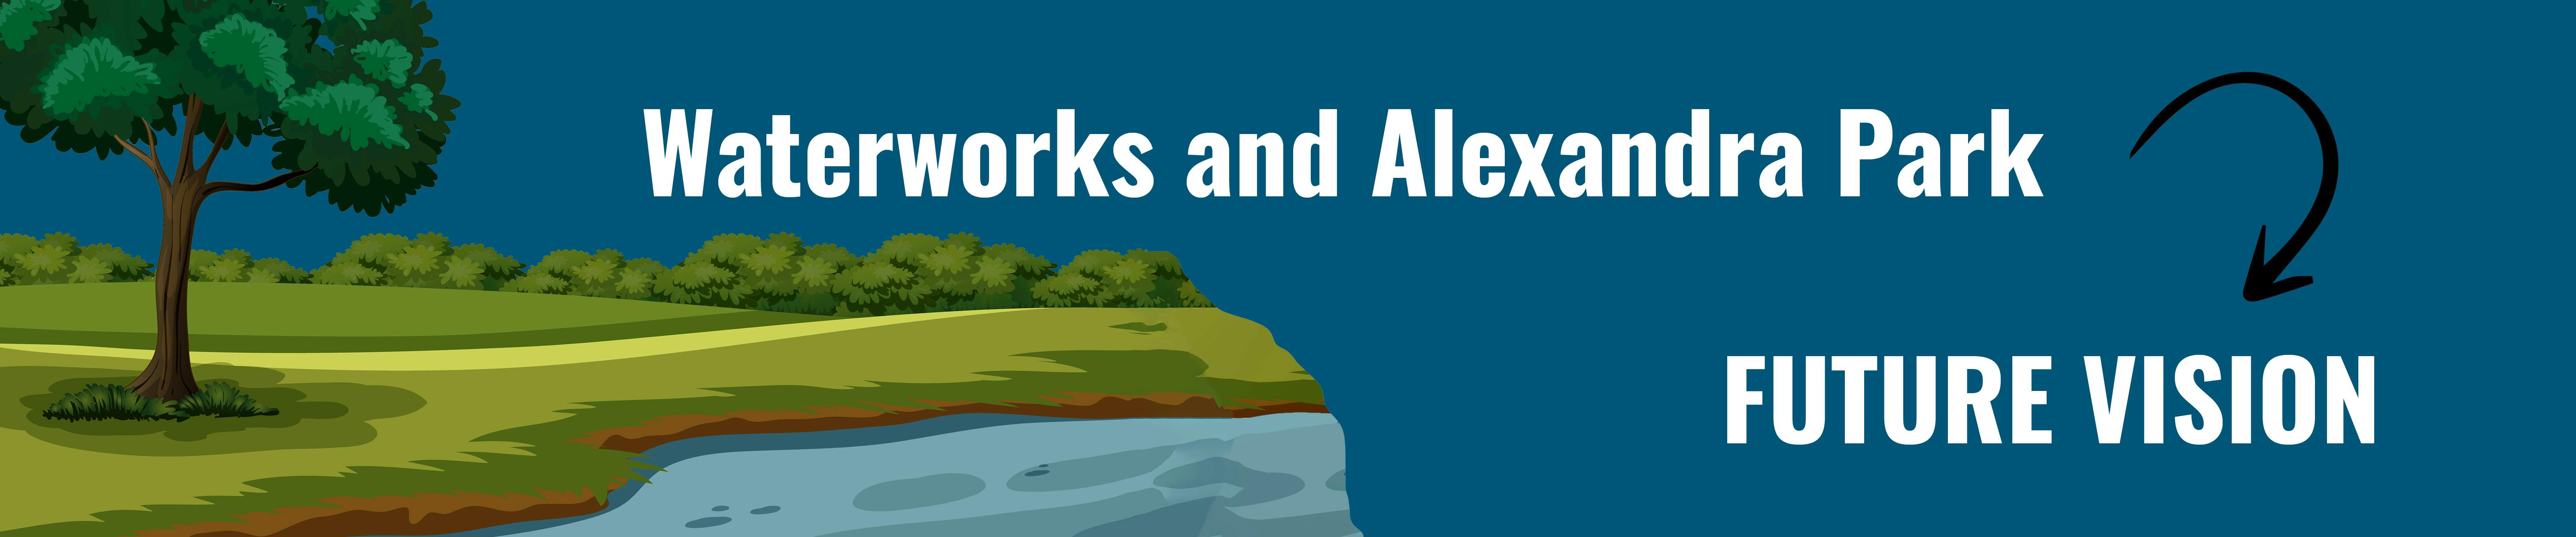 Waterworks and Alexandra Park Future Vision